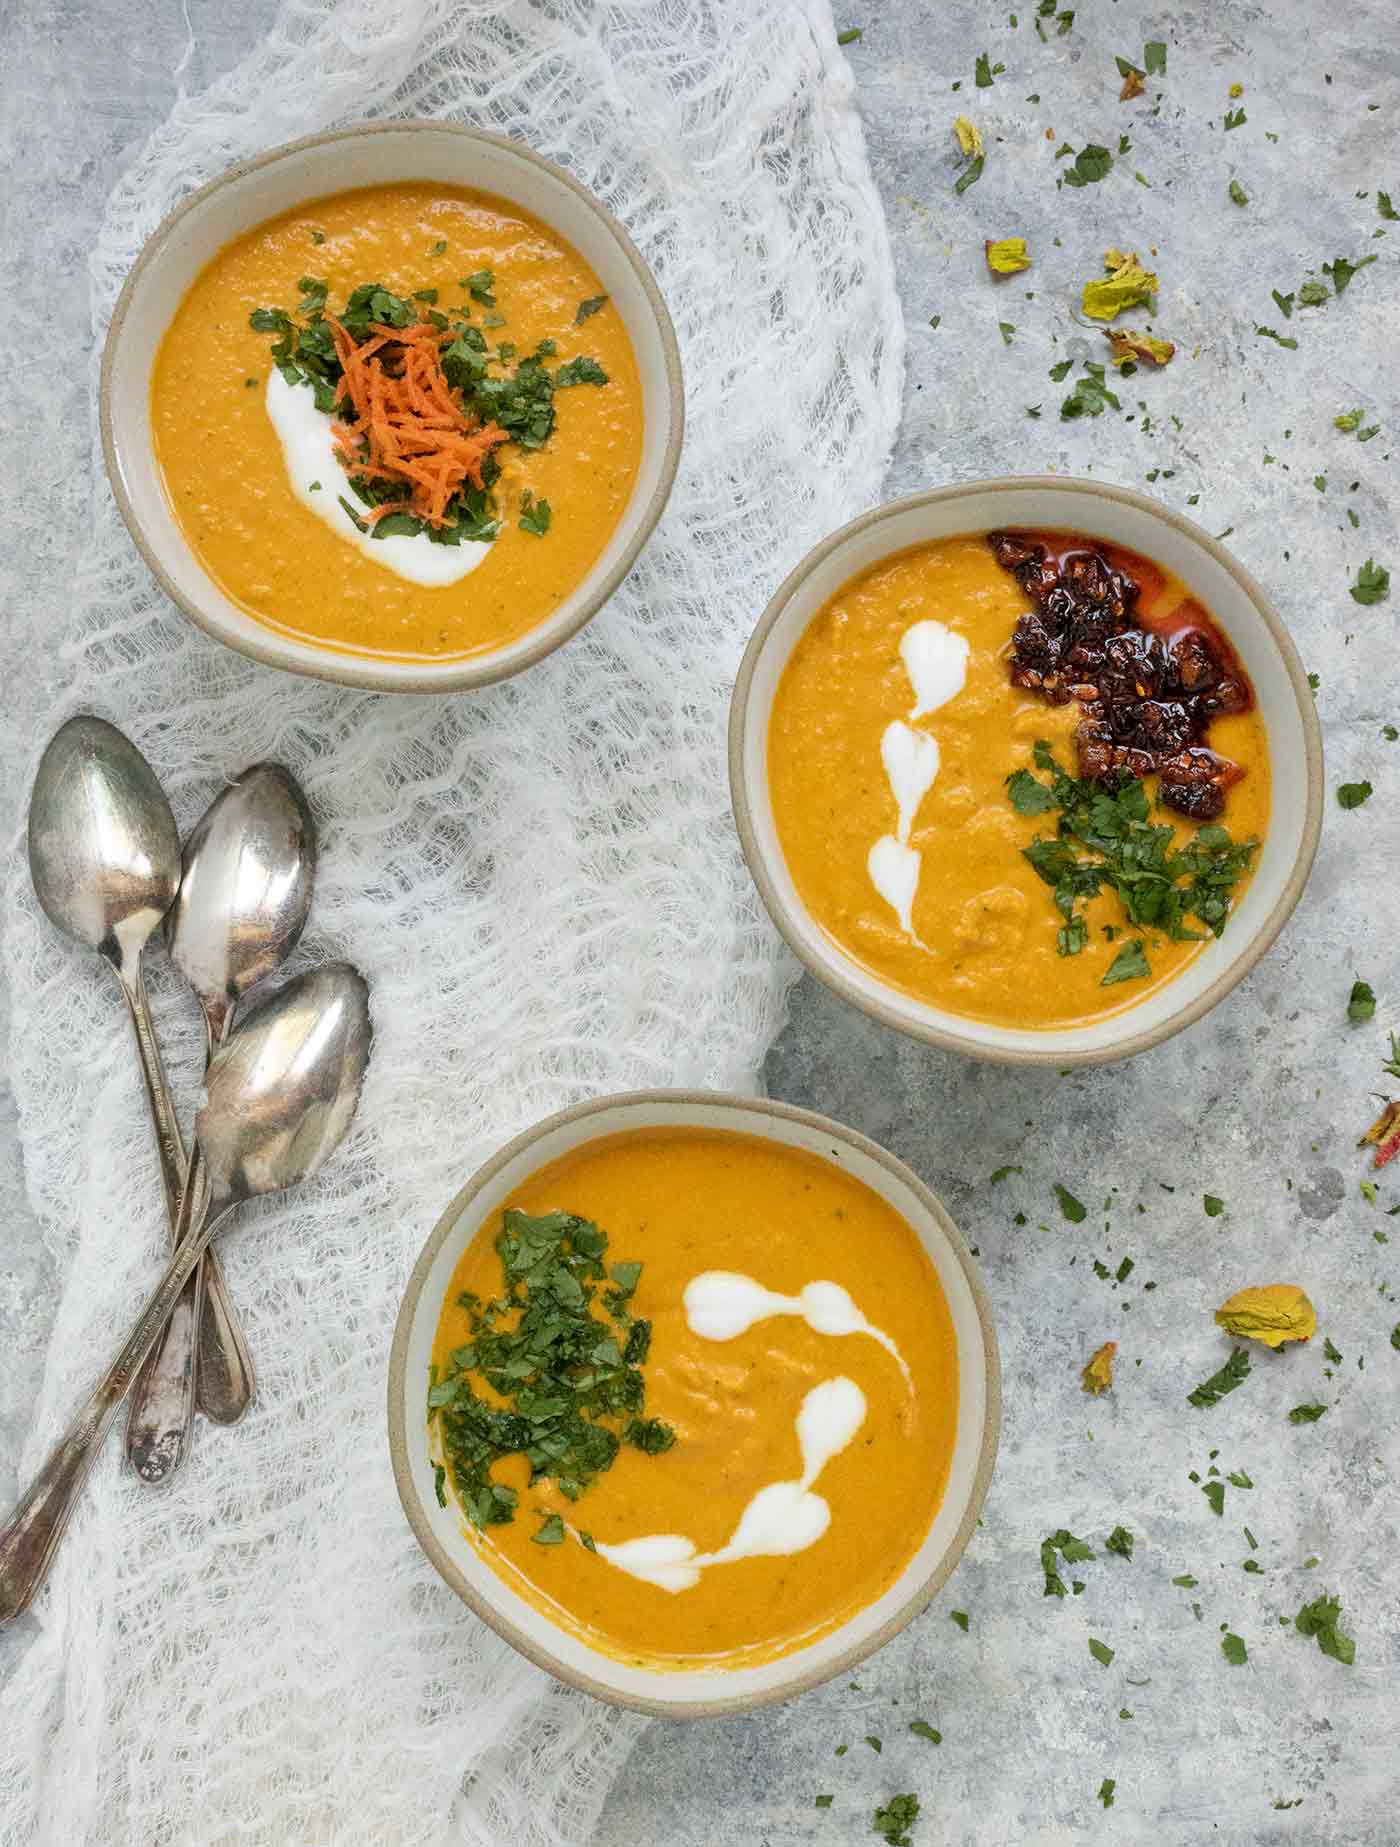 Three small bowls of carrot gazpacho with colorful garnishes.